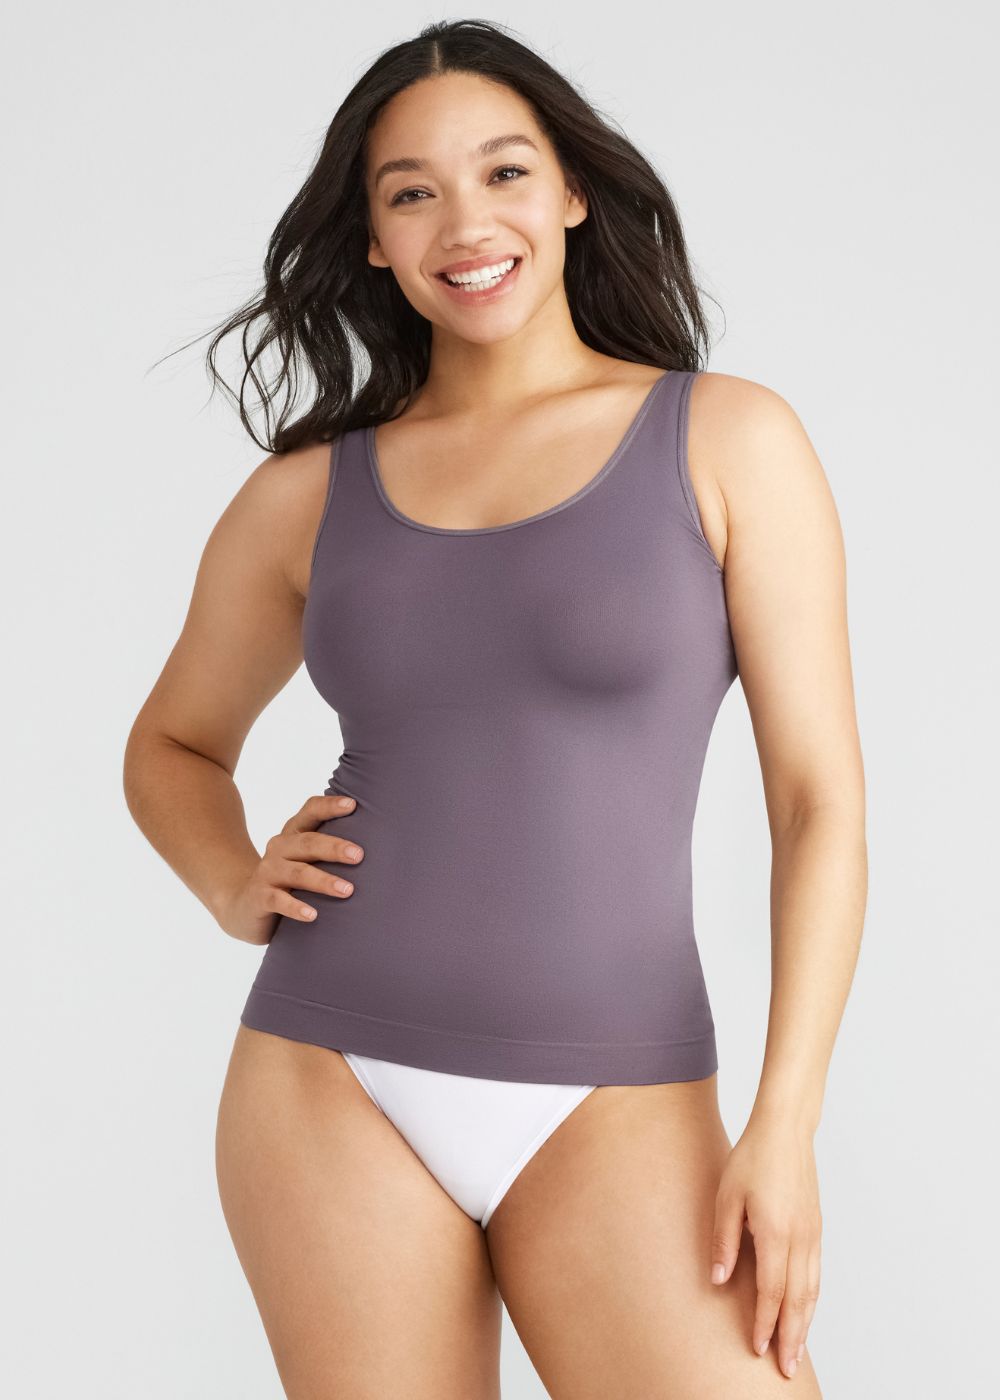 Non-Shaping 2-Way Tank - Seamless from Yummie in Dusty Mink  - 1